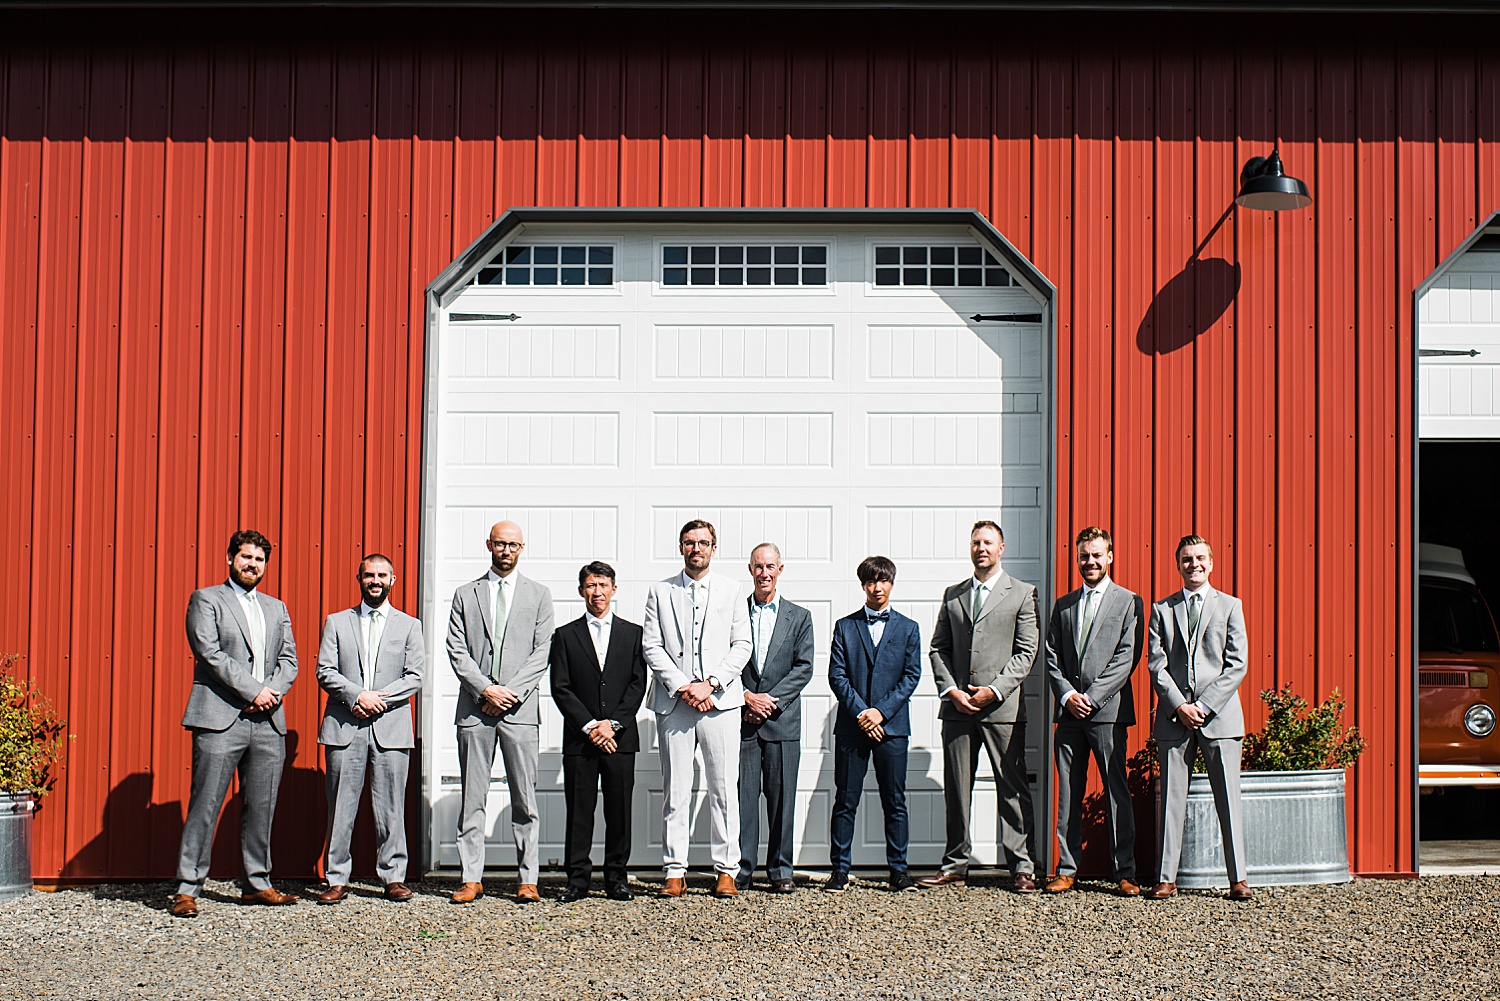 groom's party are standing in front of a red barn while looking straight into the camera